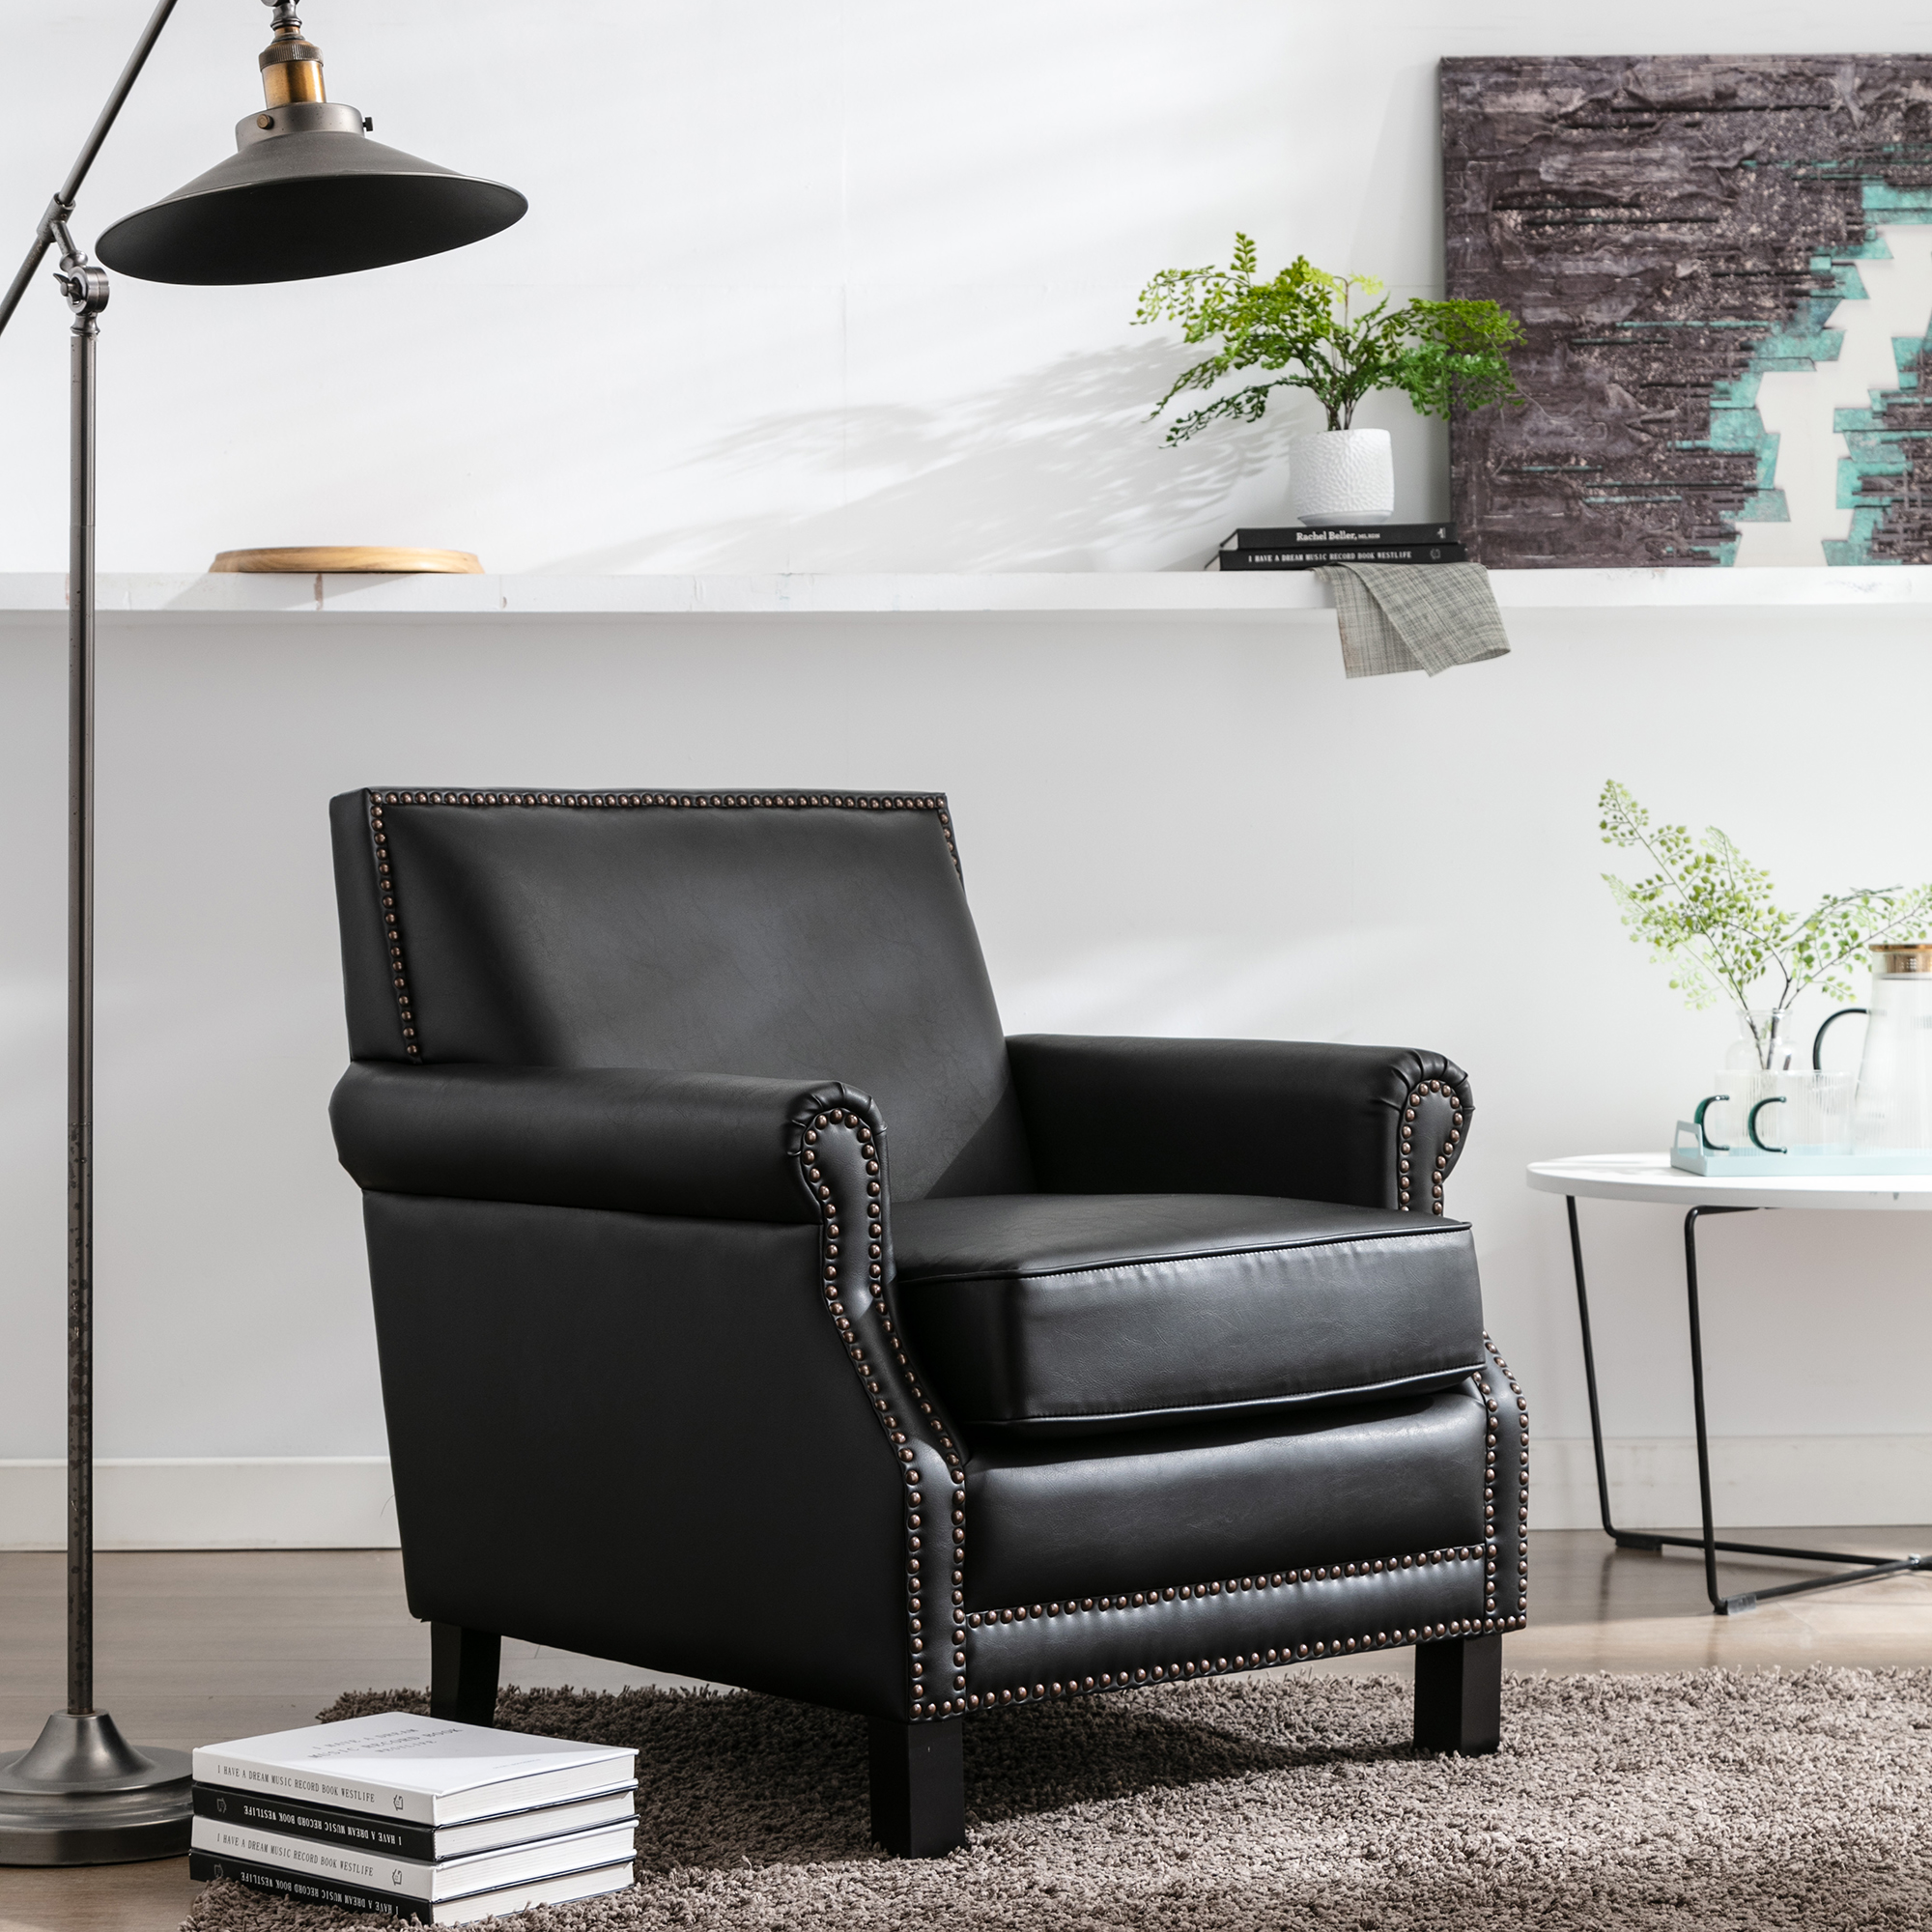 Hengming Living Traditional Upholstered PU Leather Club Chair with Nailhead Trim, ,Black-CASAINC